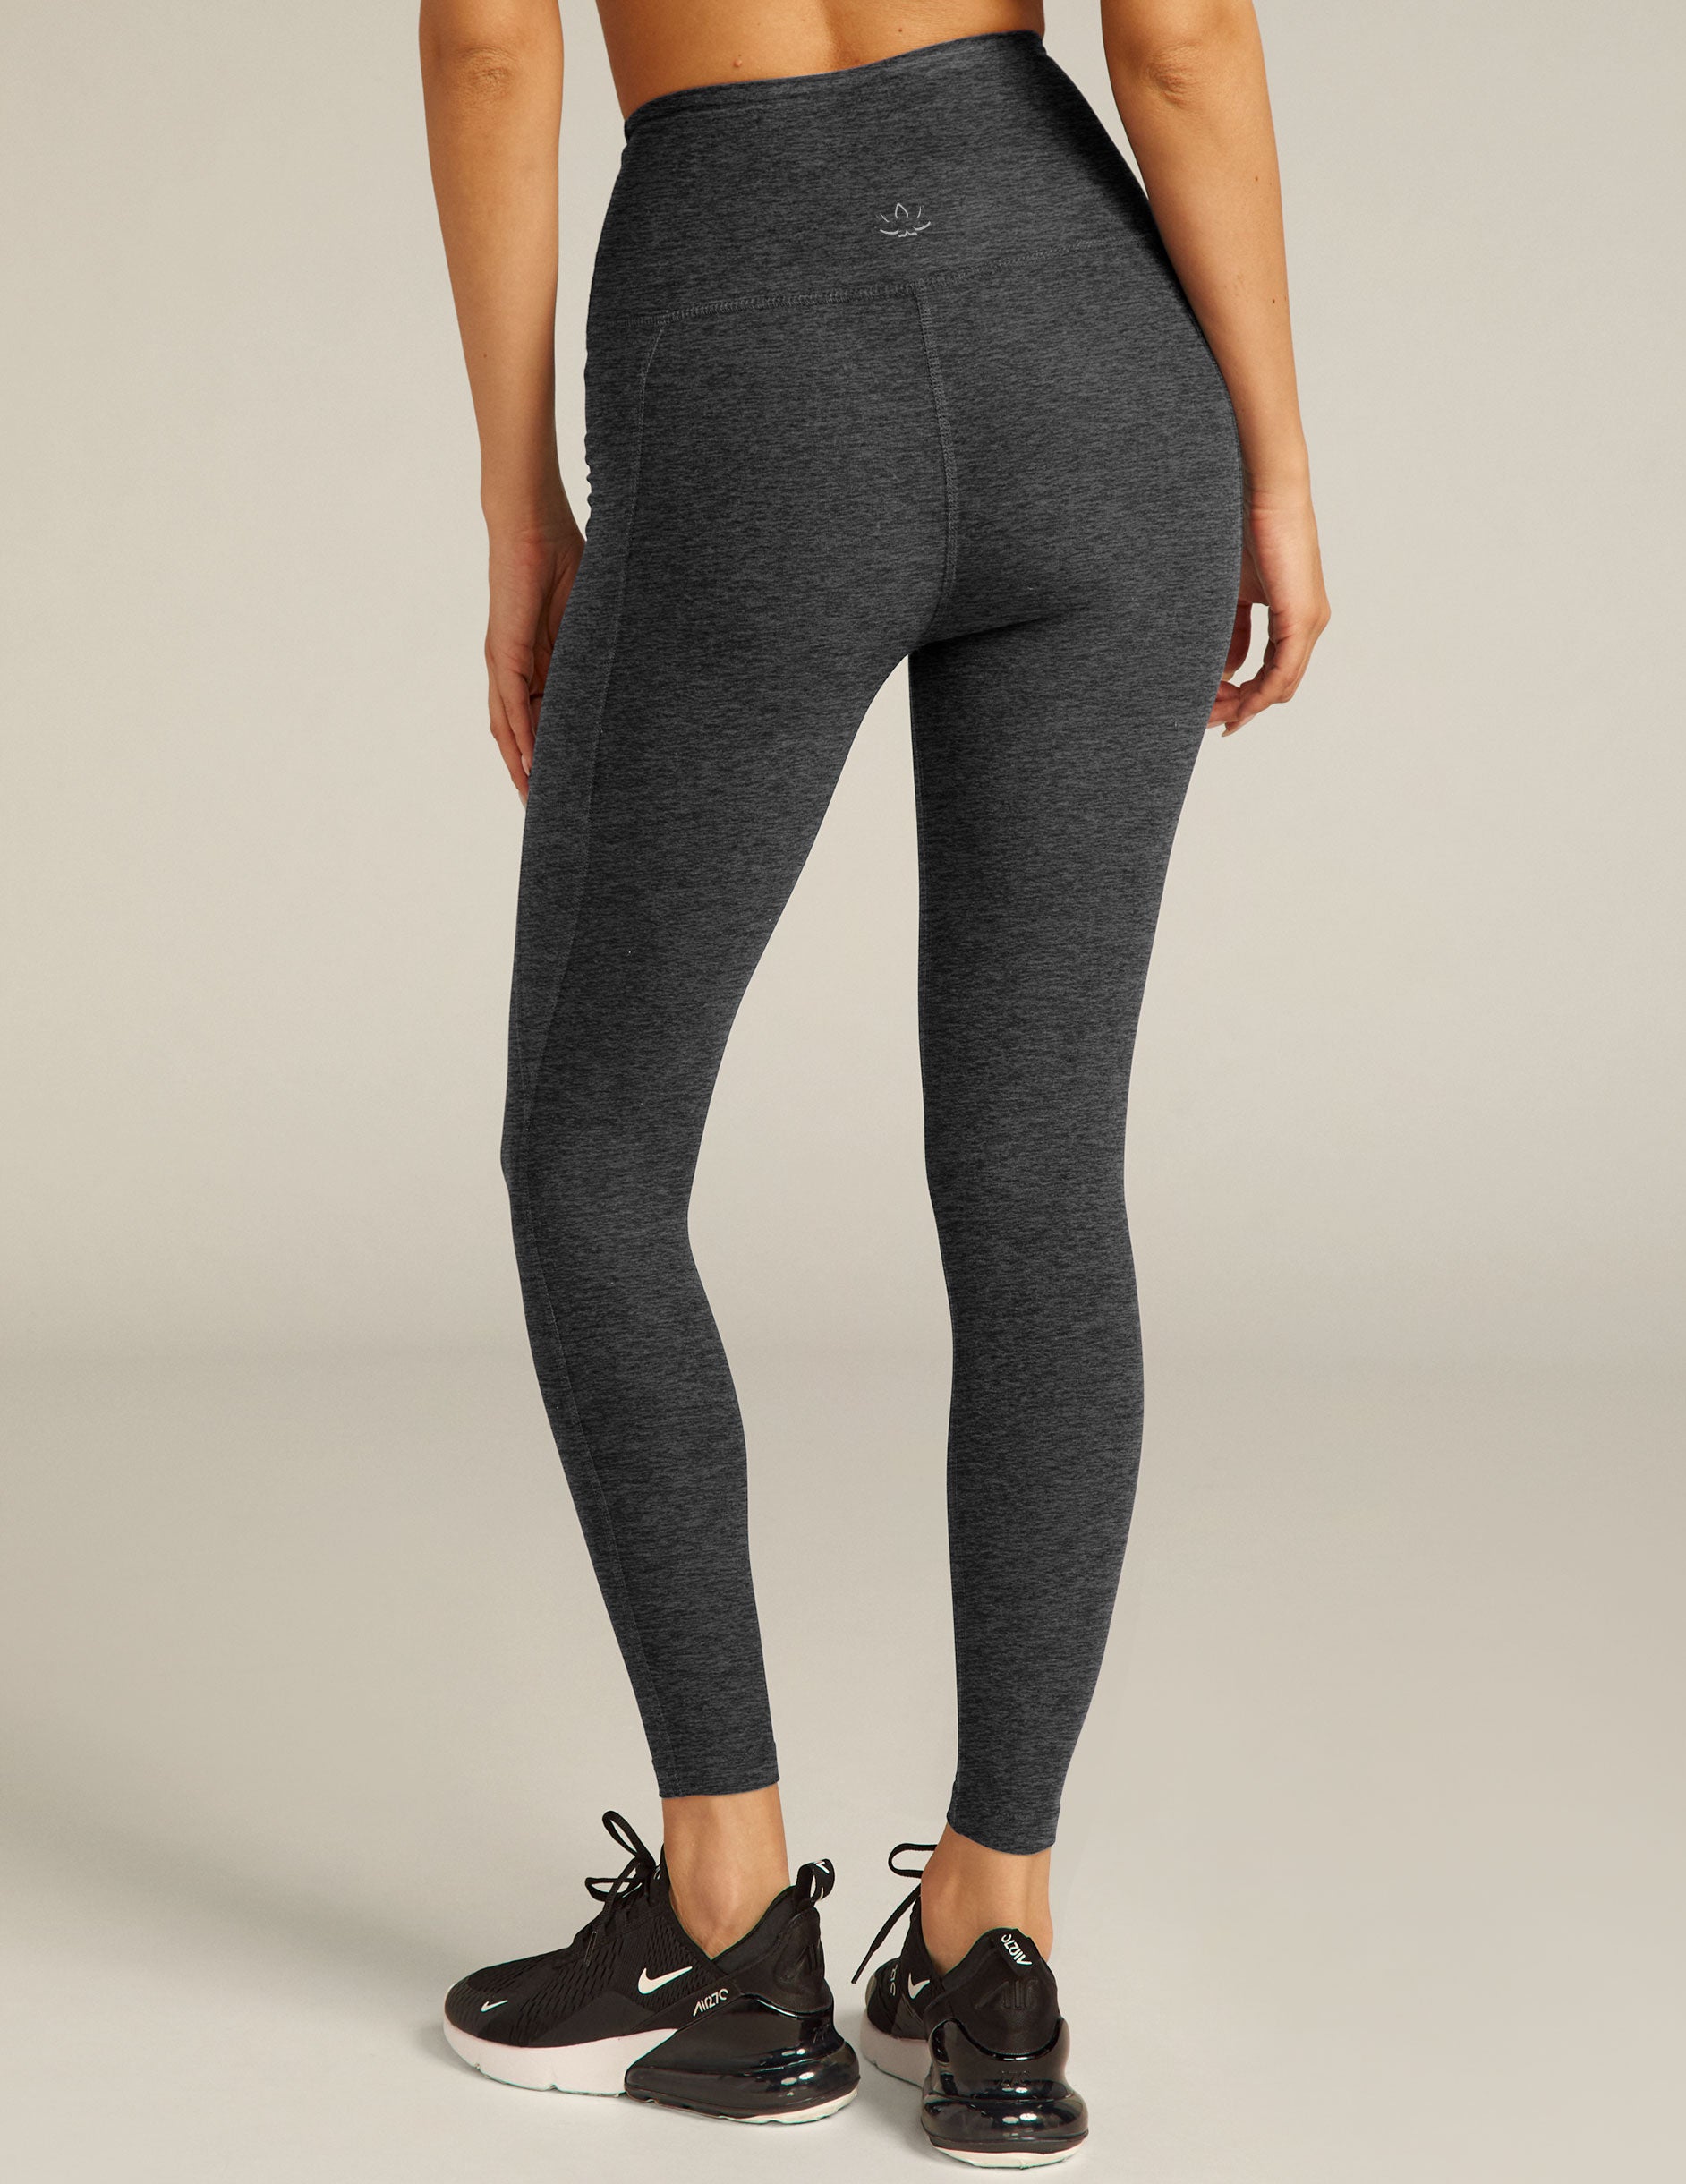 black charcoal high-waisted midi leggings with pockets. 